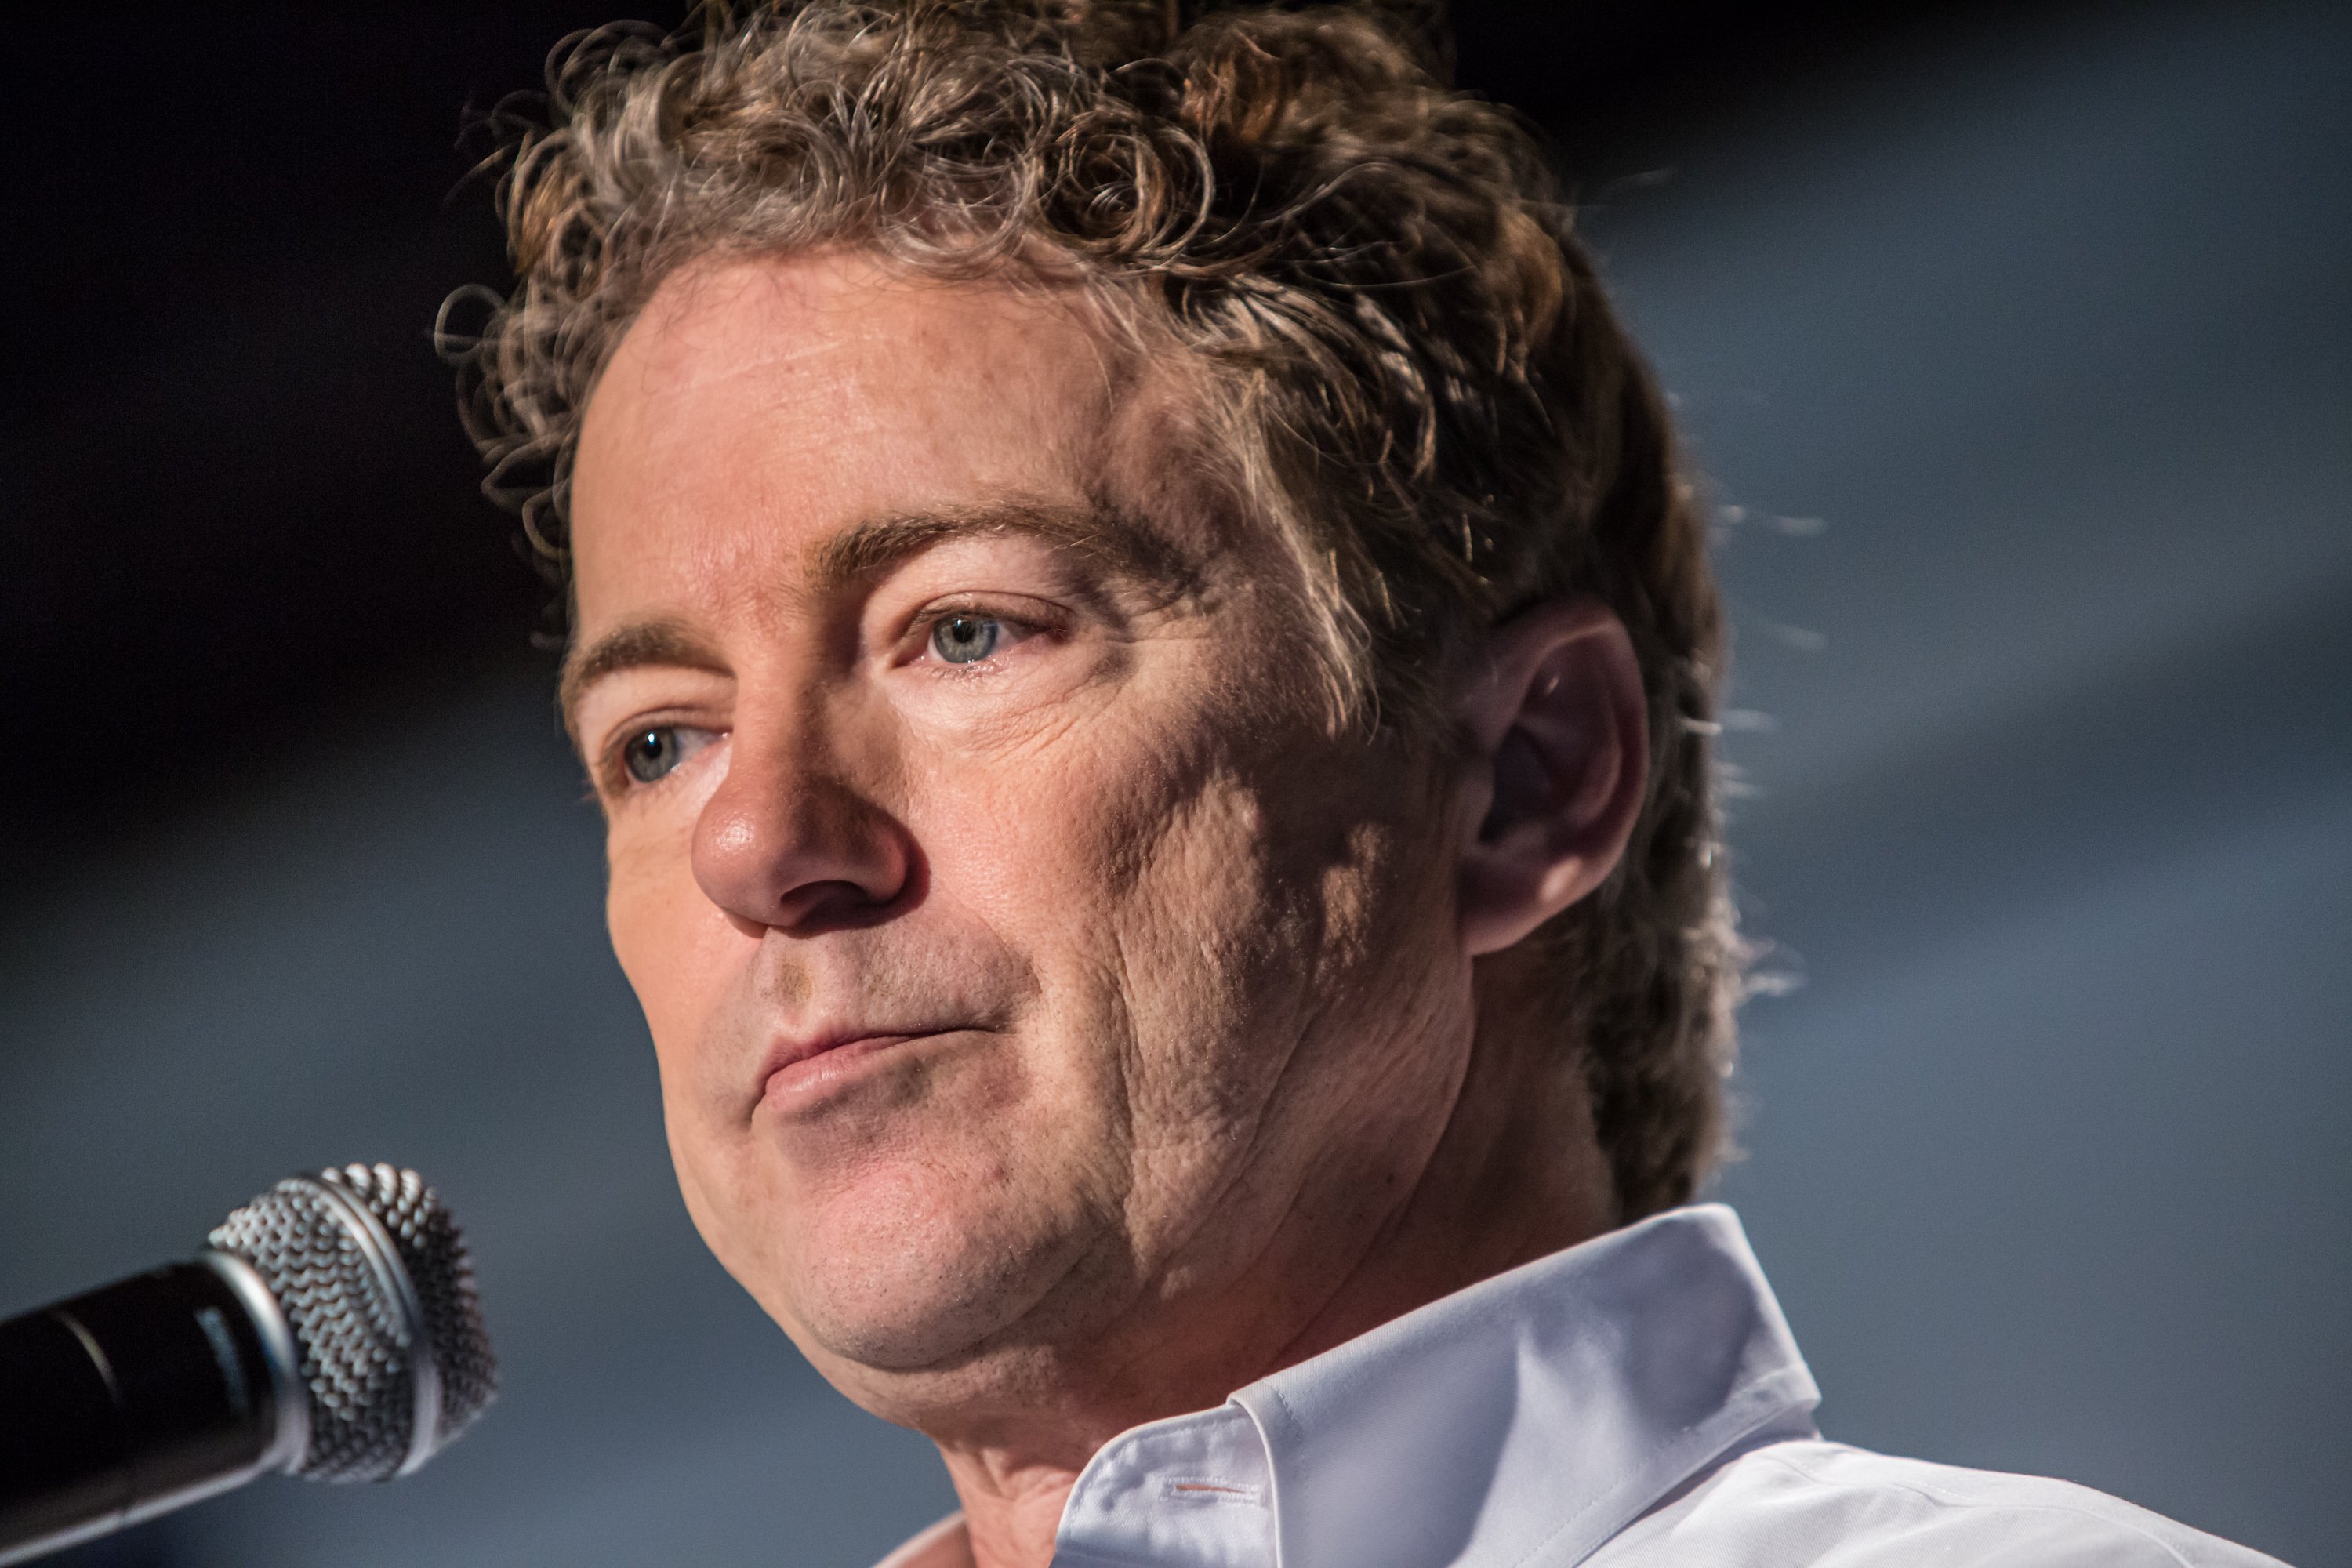 Rand Paul speaks at a campaign event at Drake University on Jan. 28, 2016 in Des Moines, Iowa. (Brendan Hoffman—Getty Images)